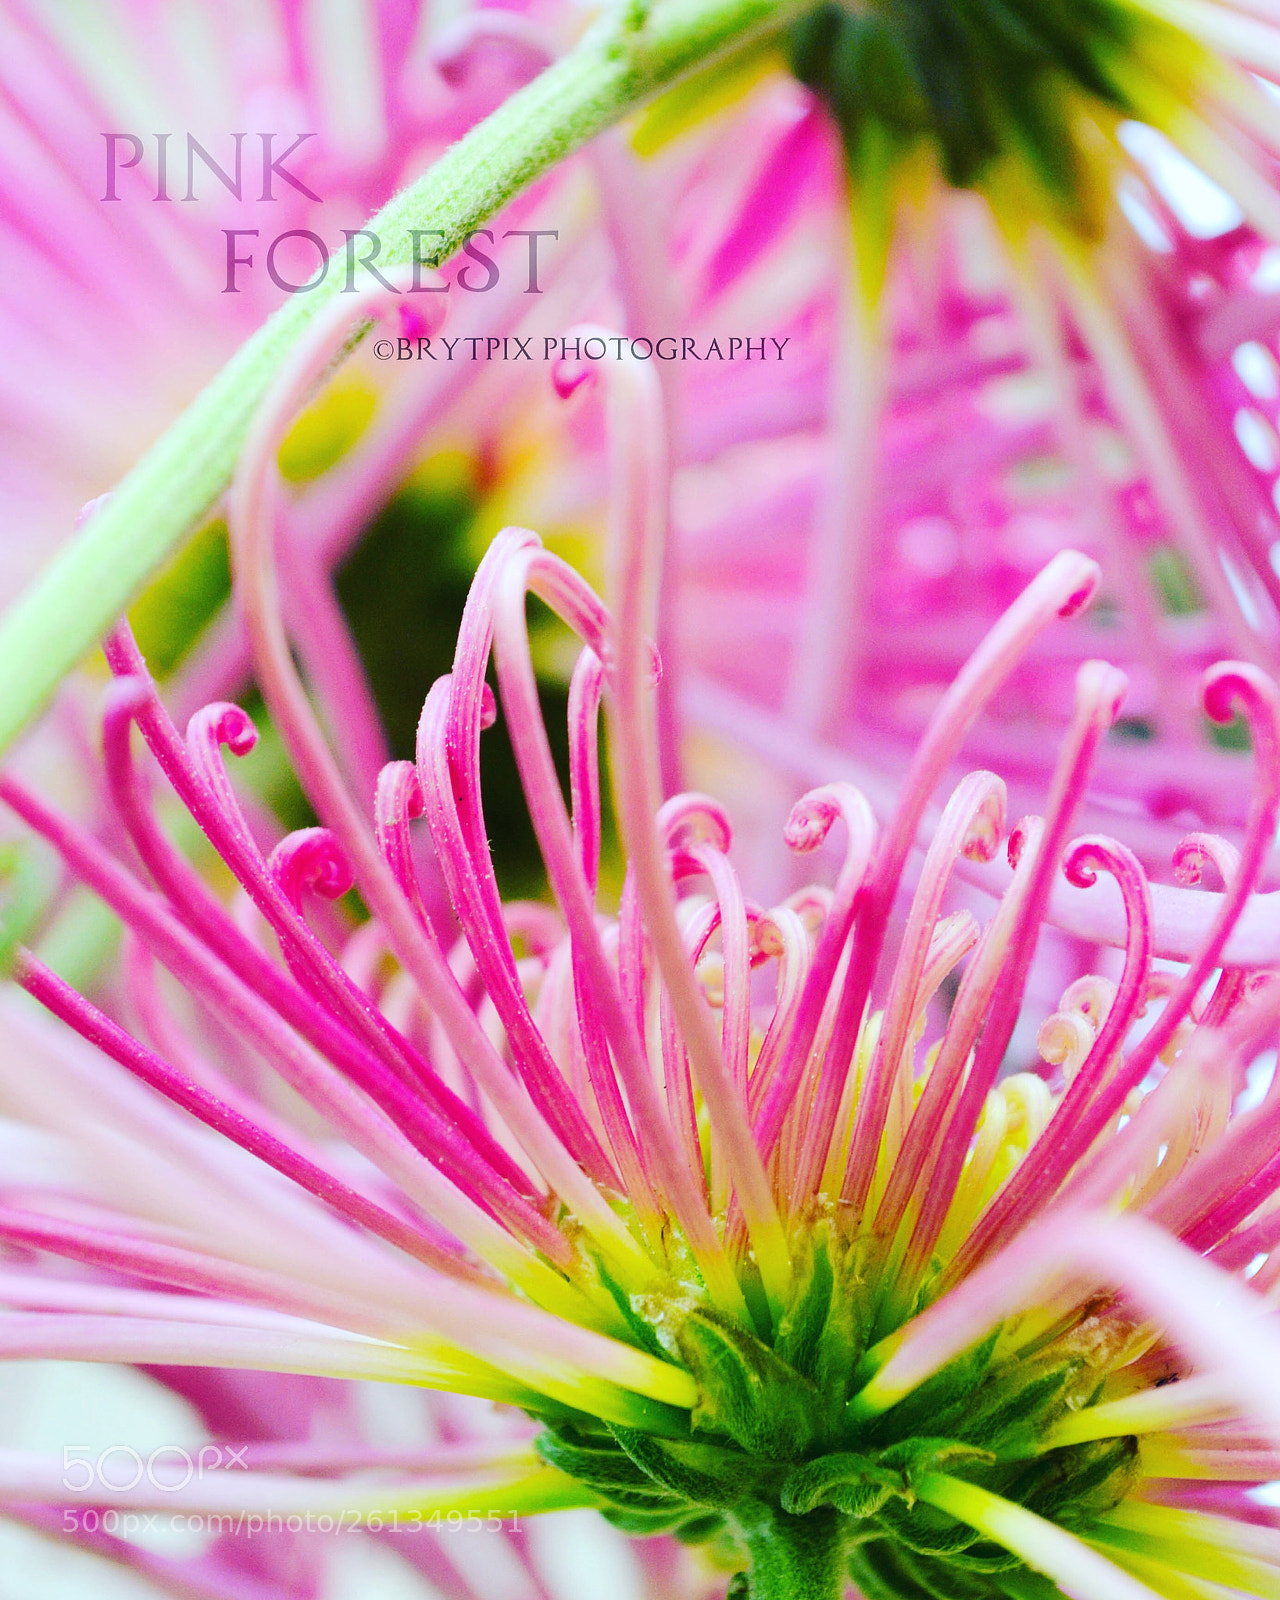 Nikon D3100 sample photo. Pink forest photography